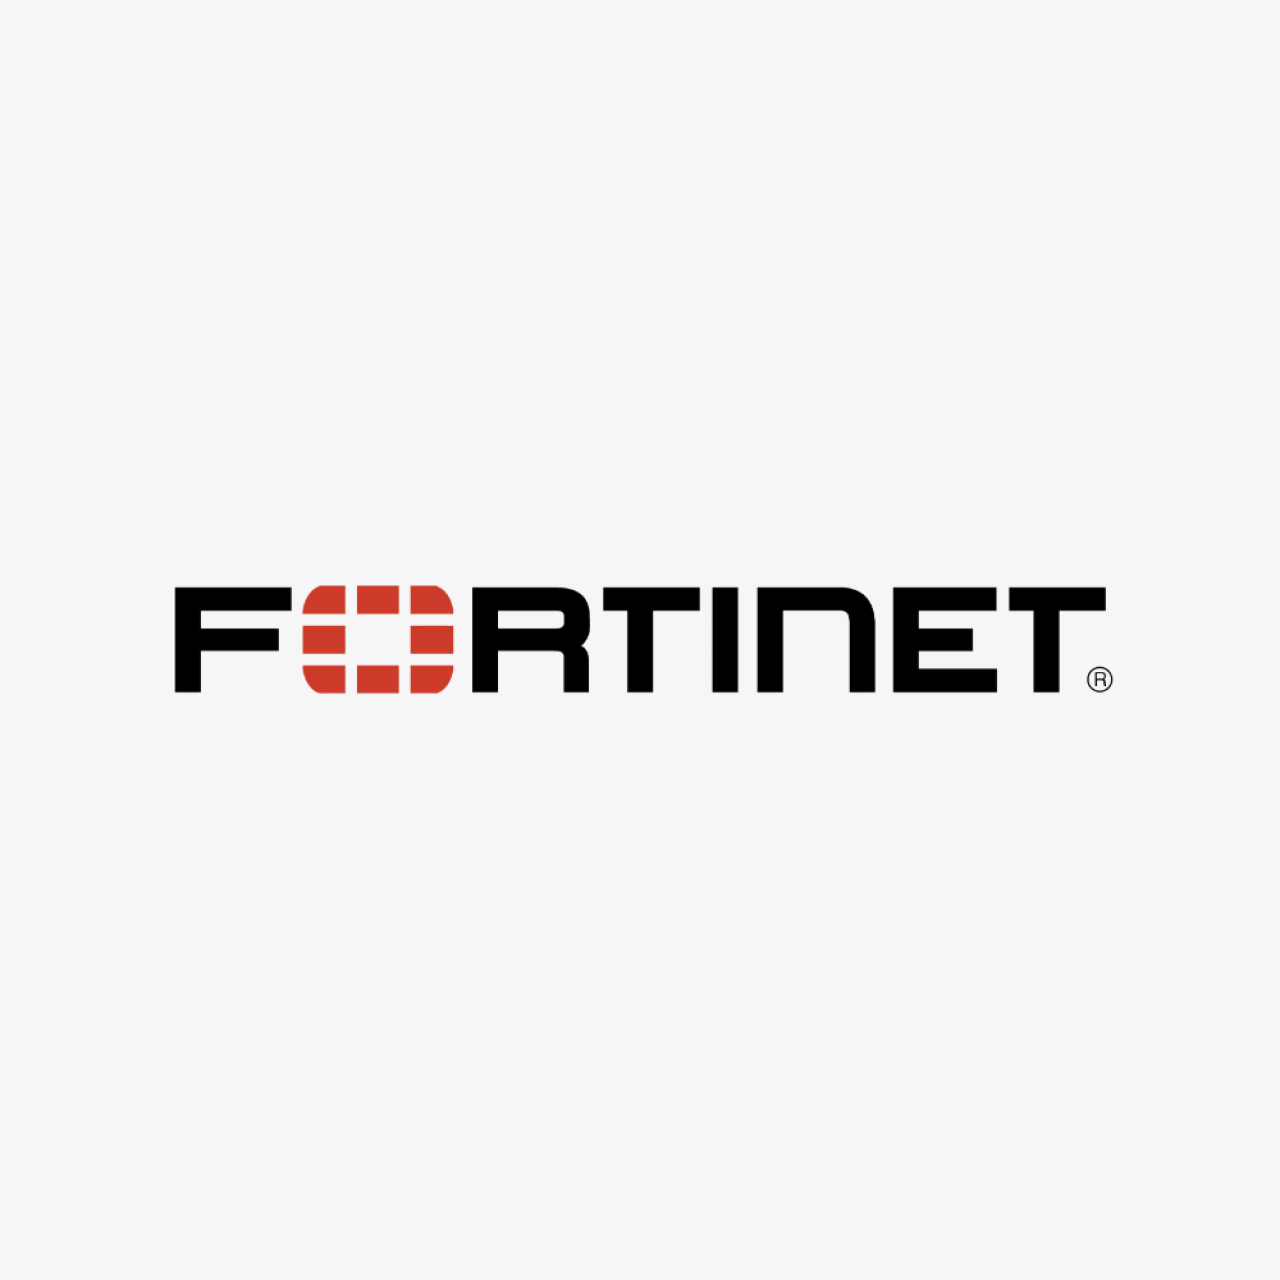 FORTINET.